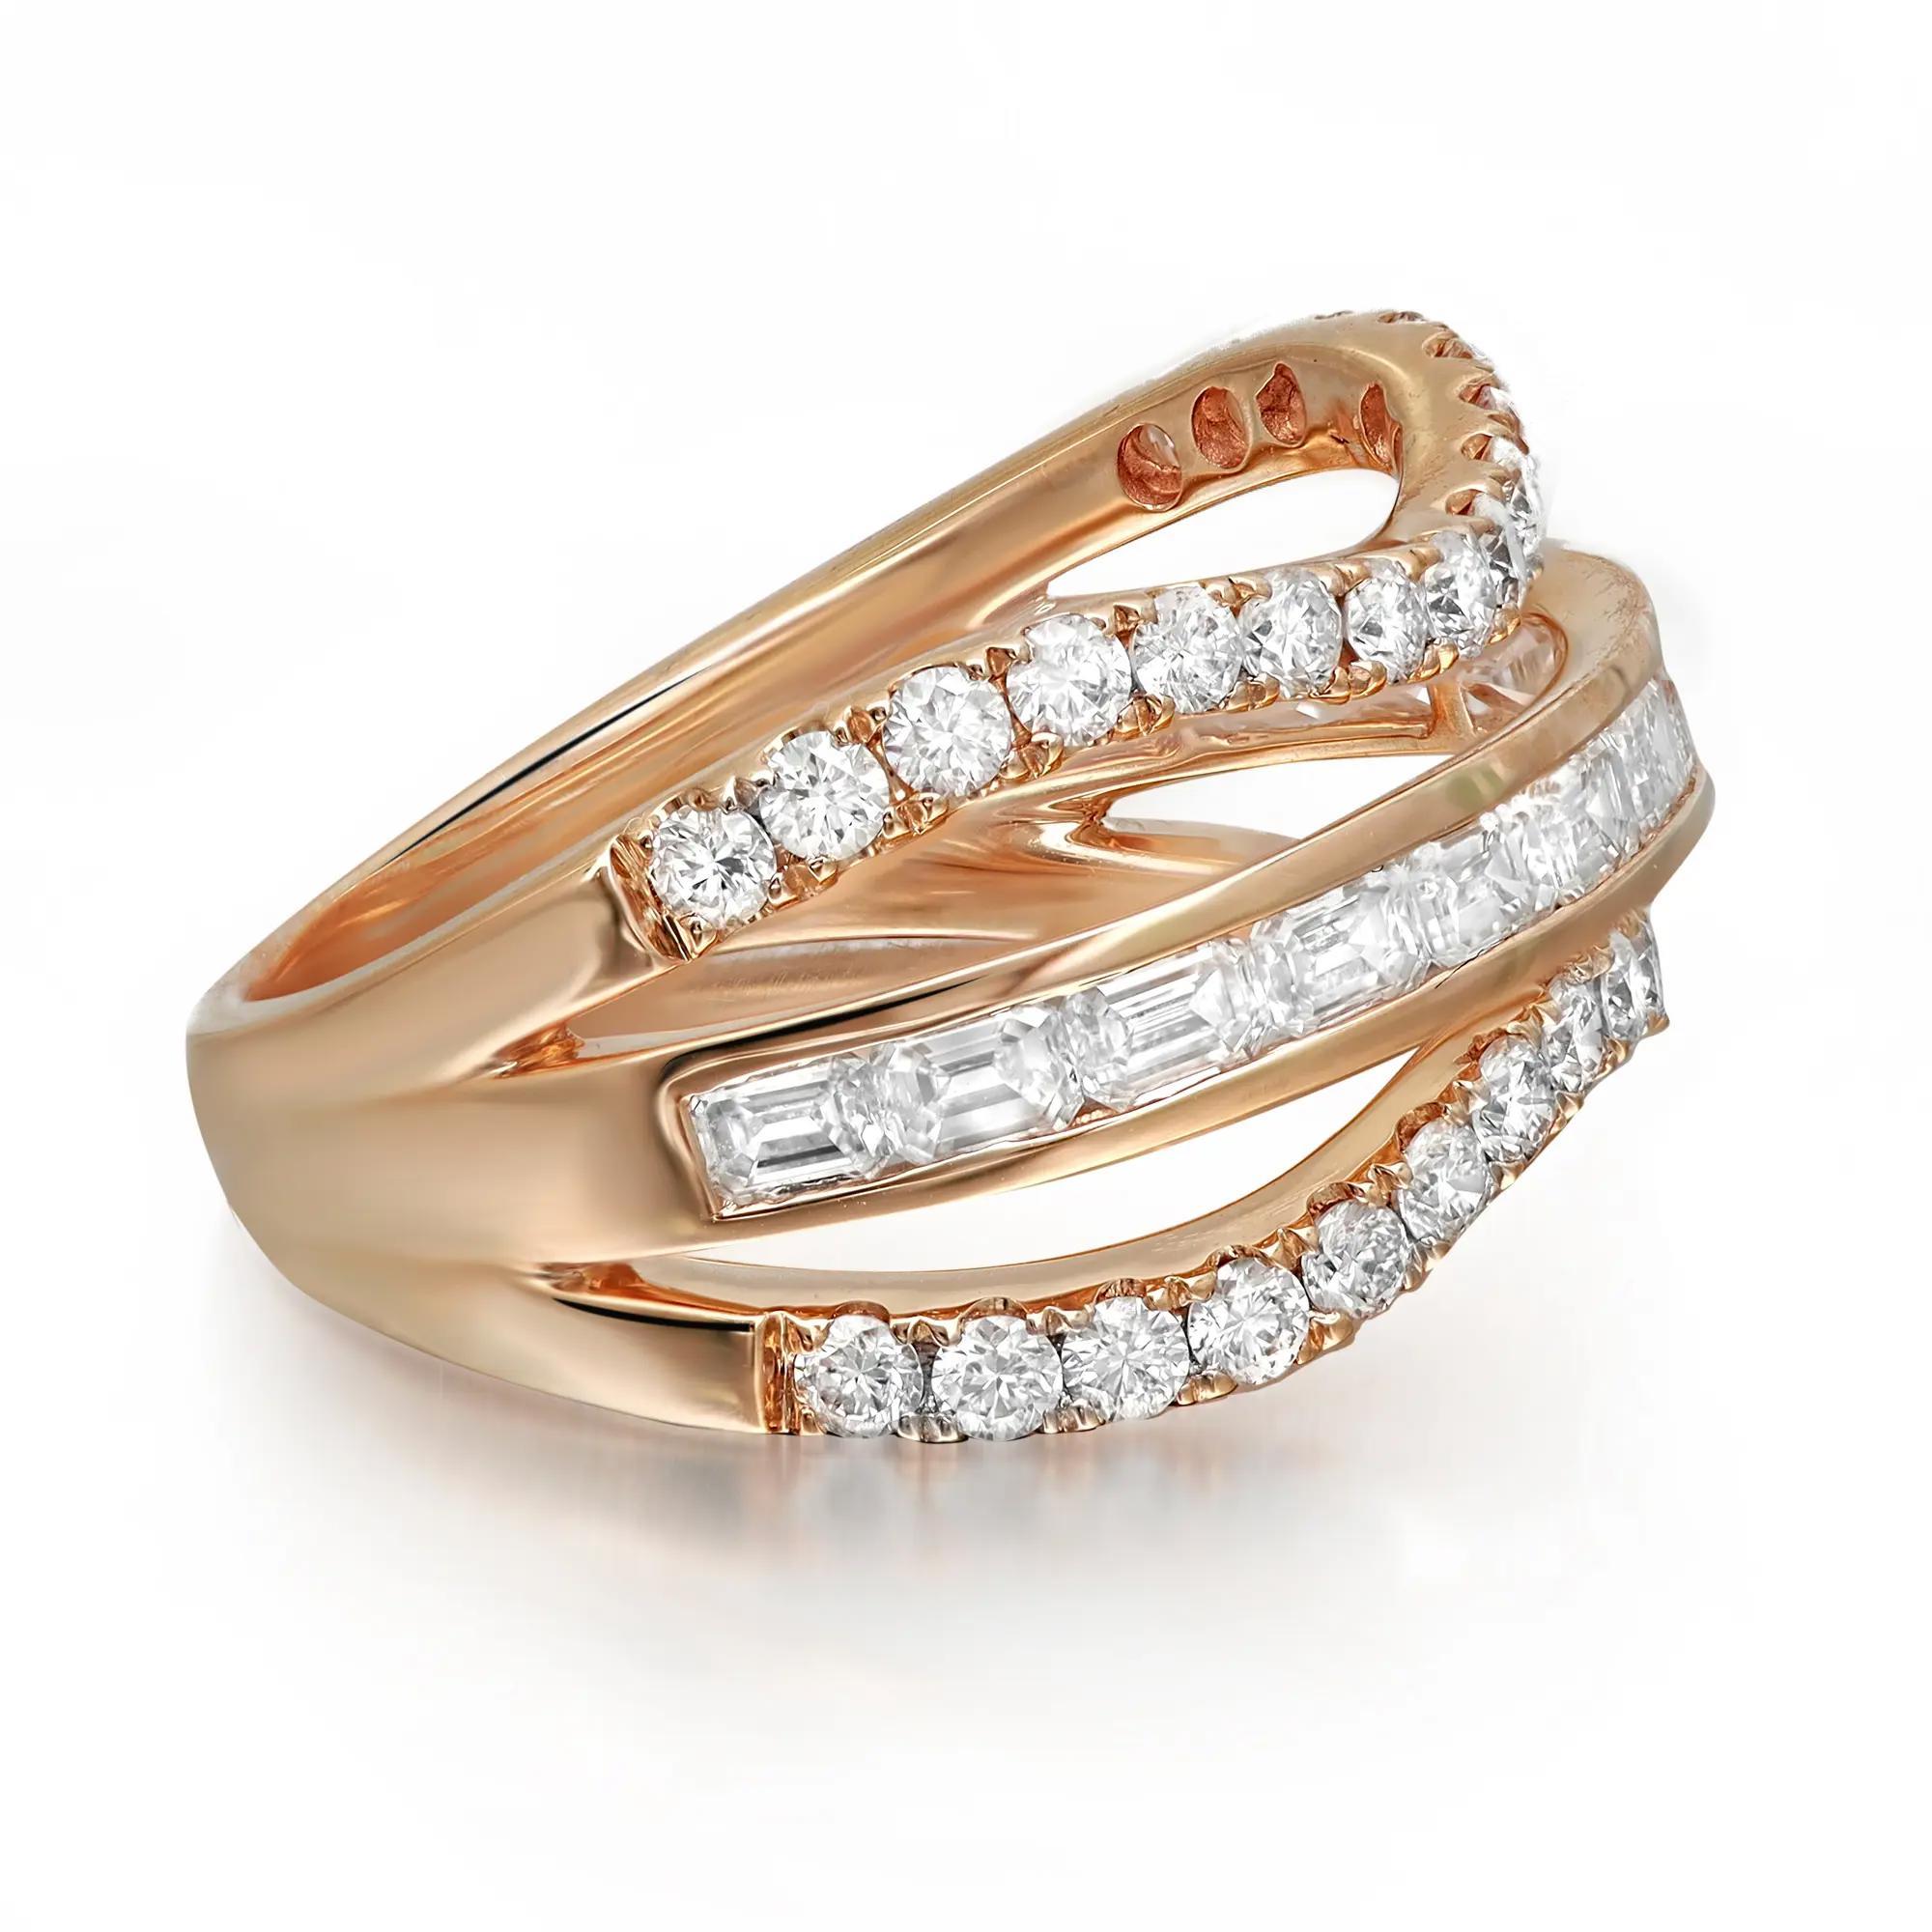 Emerald Cut & Round Cut Diamond Band Ring 18K Rose Gold 1.61Cttw Size 6.5 In New Condition For Sale In New York, NY